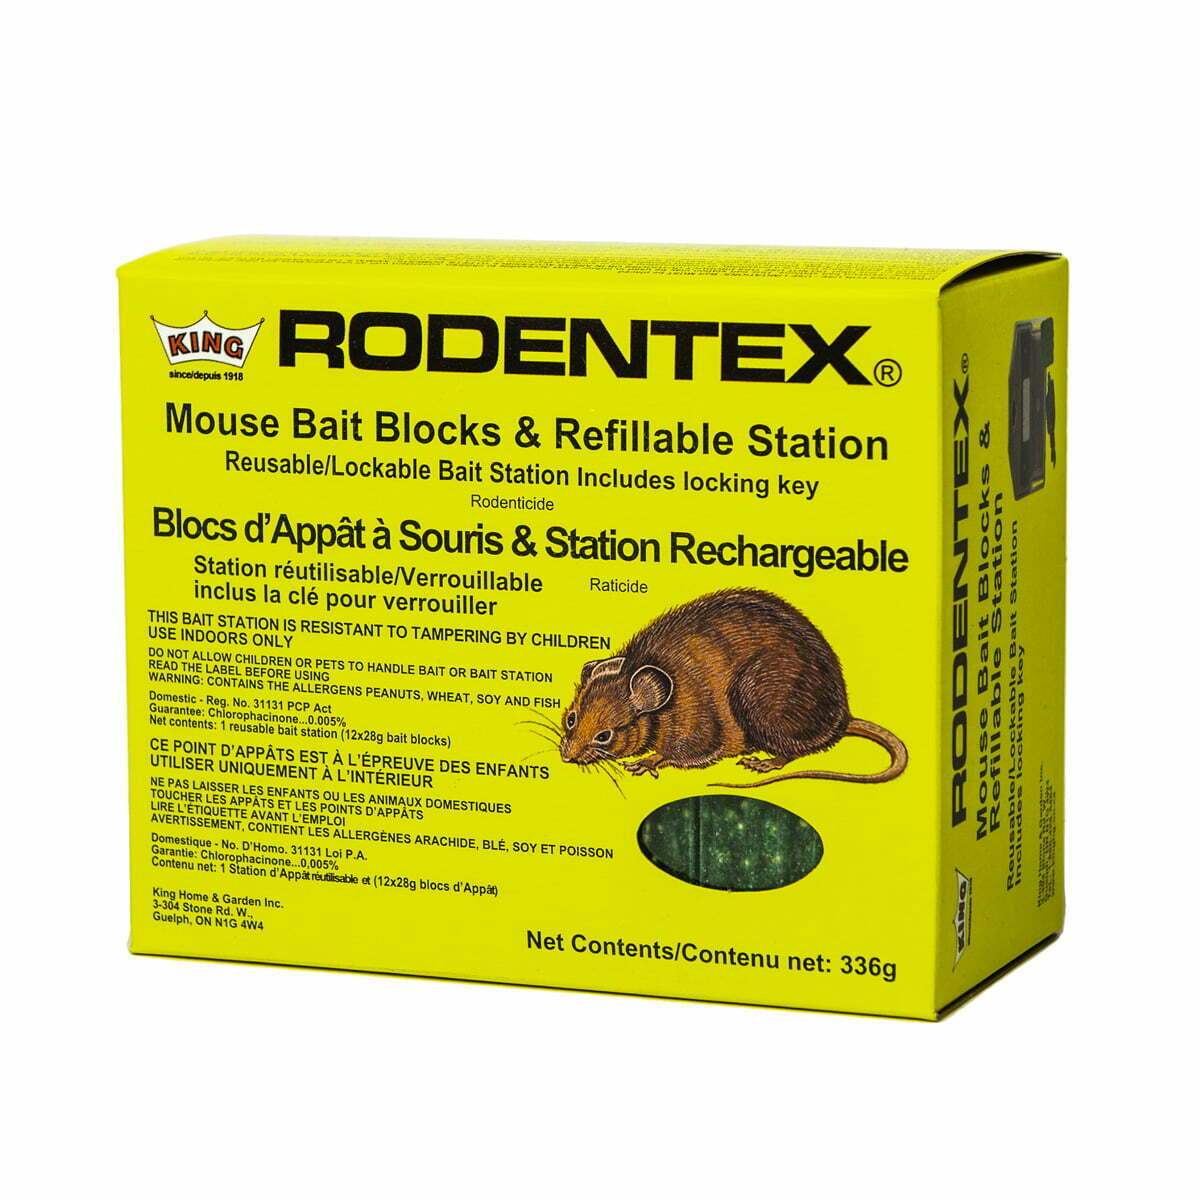 Rodentex mouse bait blocs and station